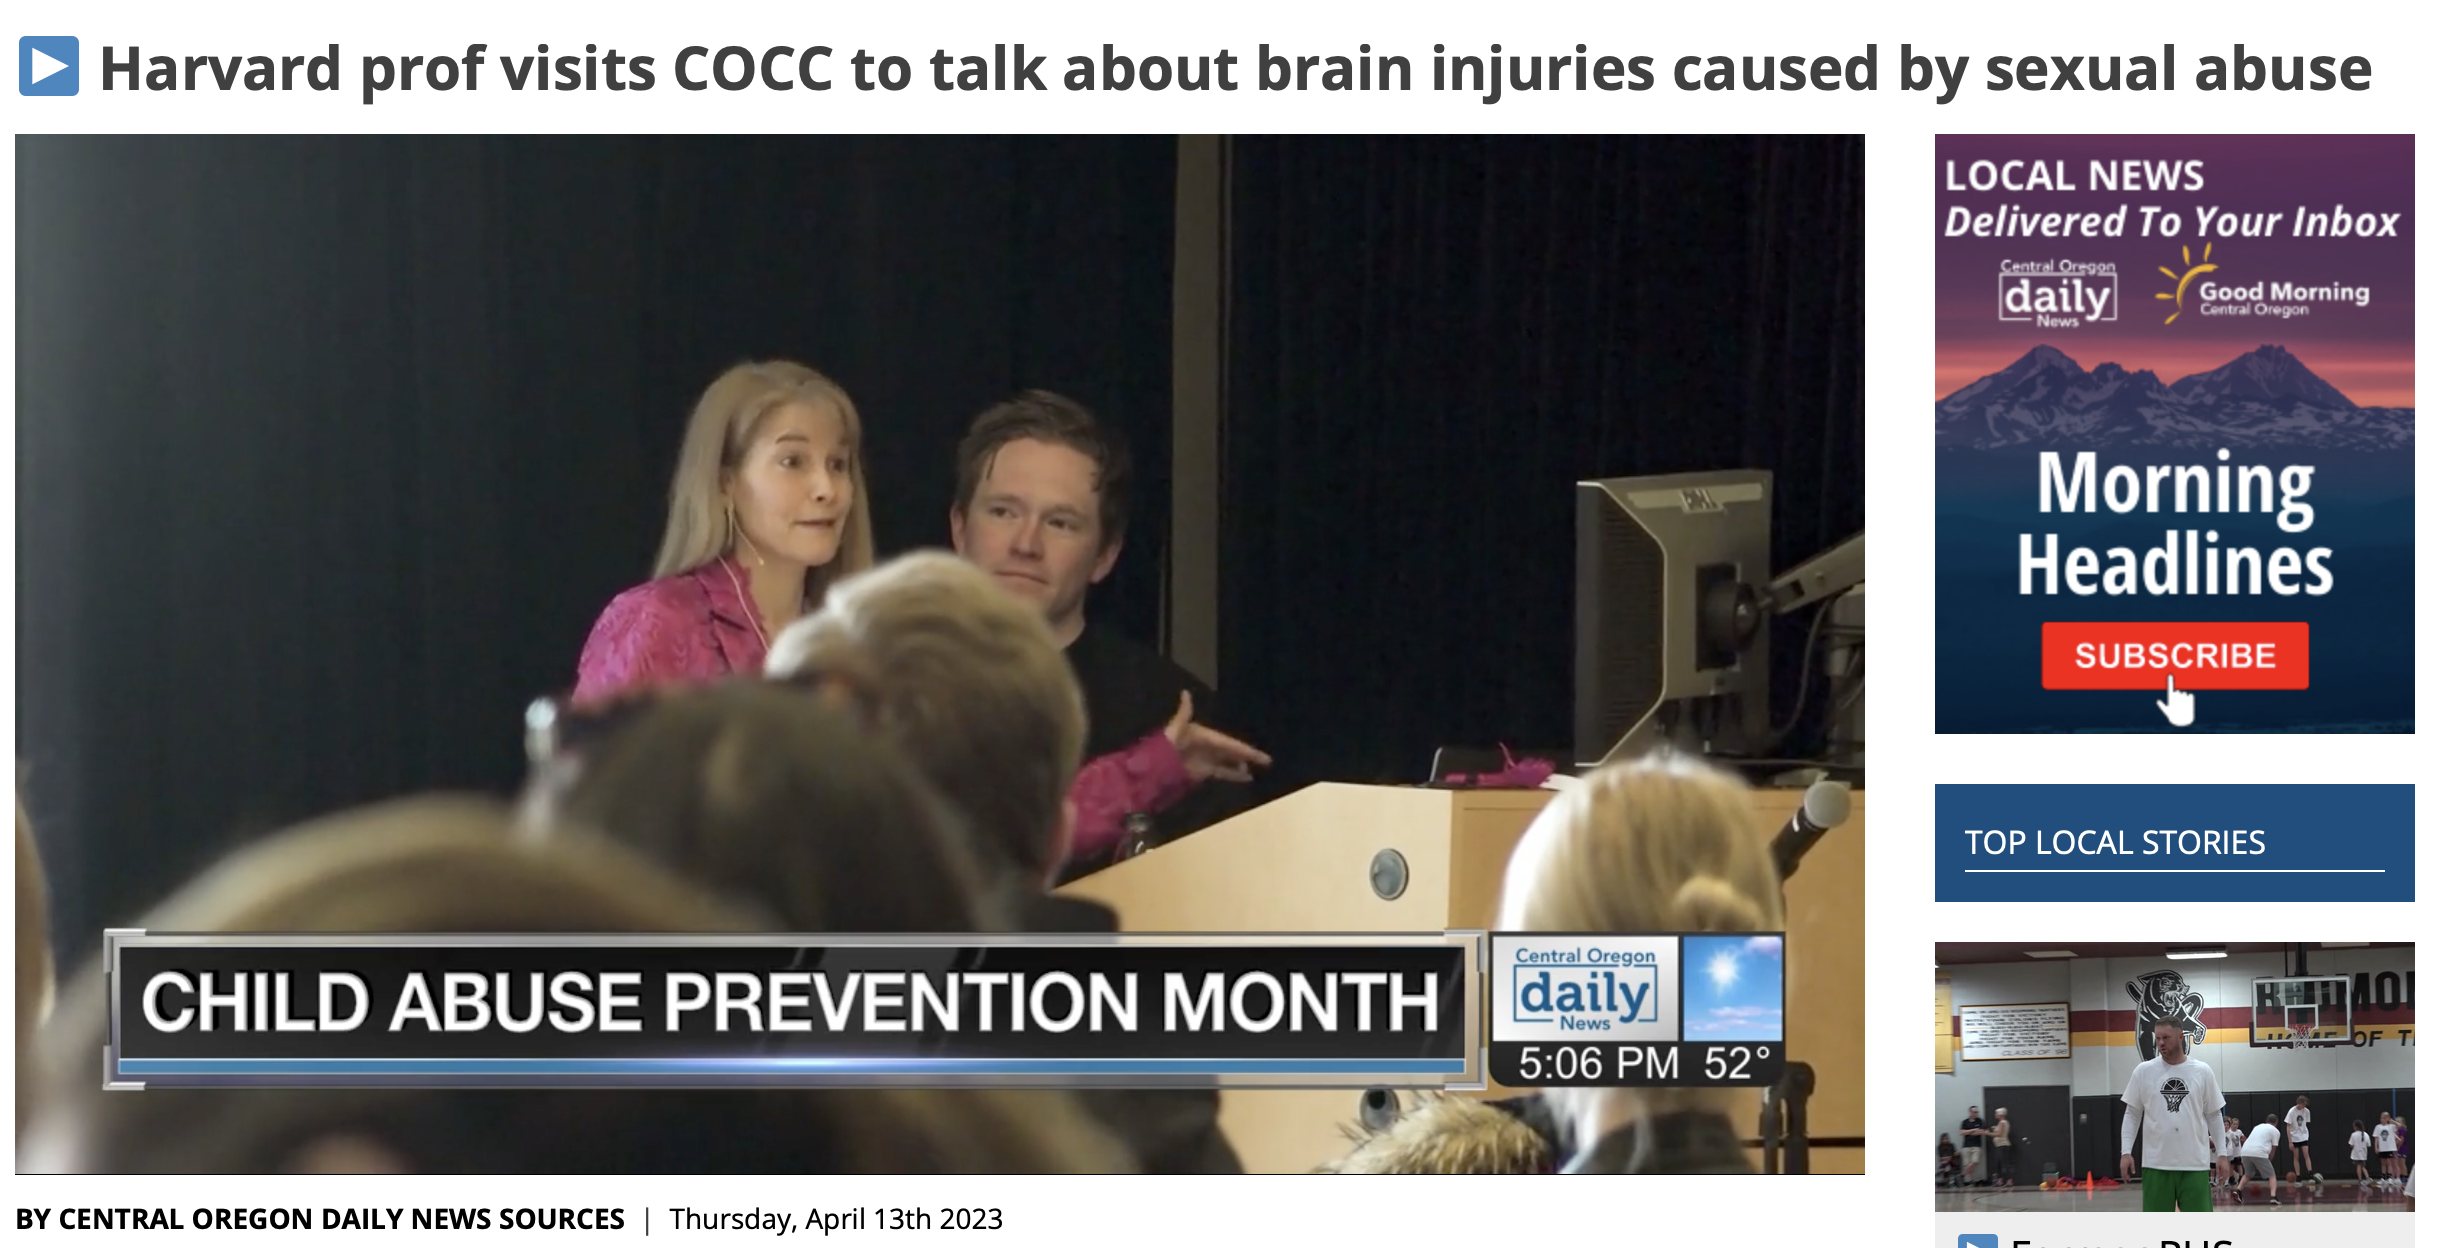 Harvard prof visits COCC to talk about brain injuries caused by sexual abuse